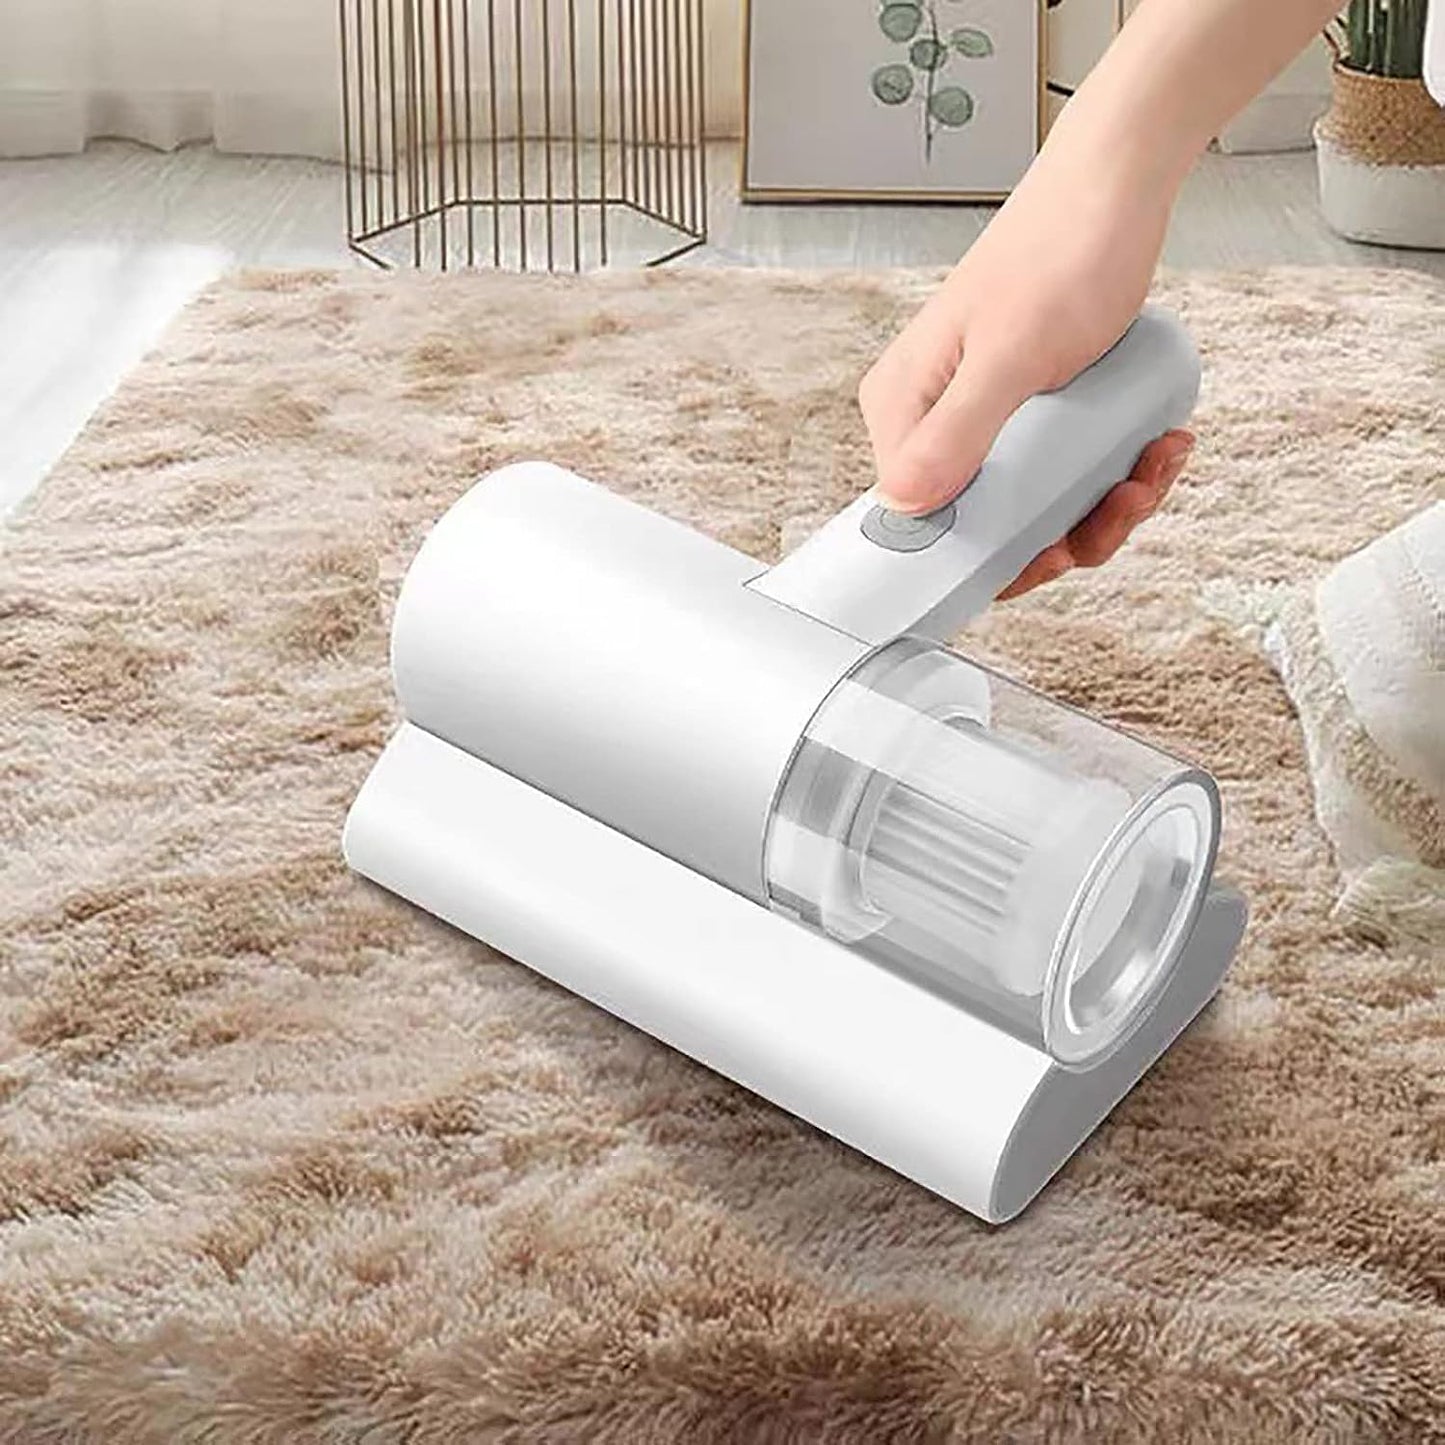 Mite Remover & Vacuum Cleaner - Clean your Bed